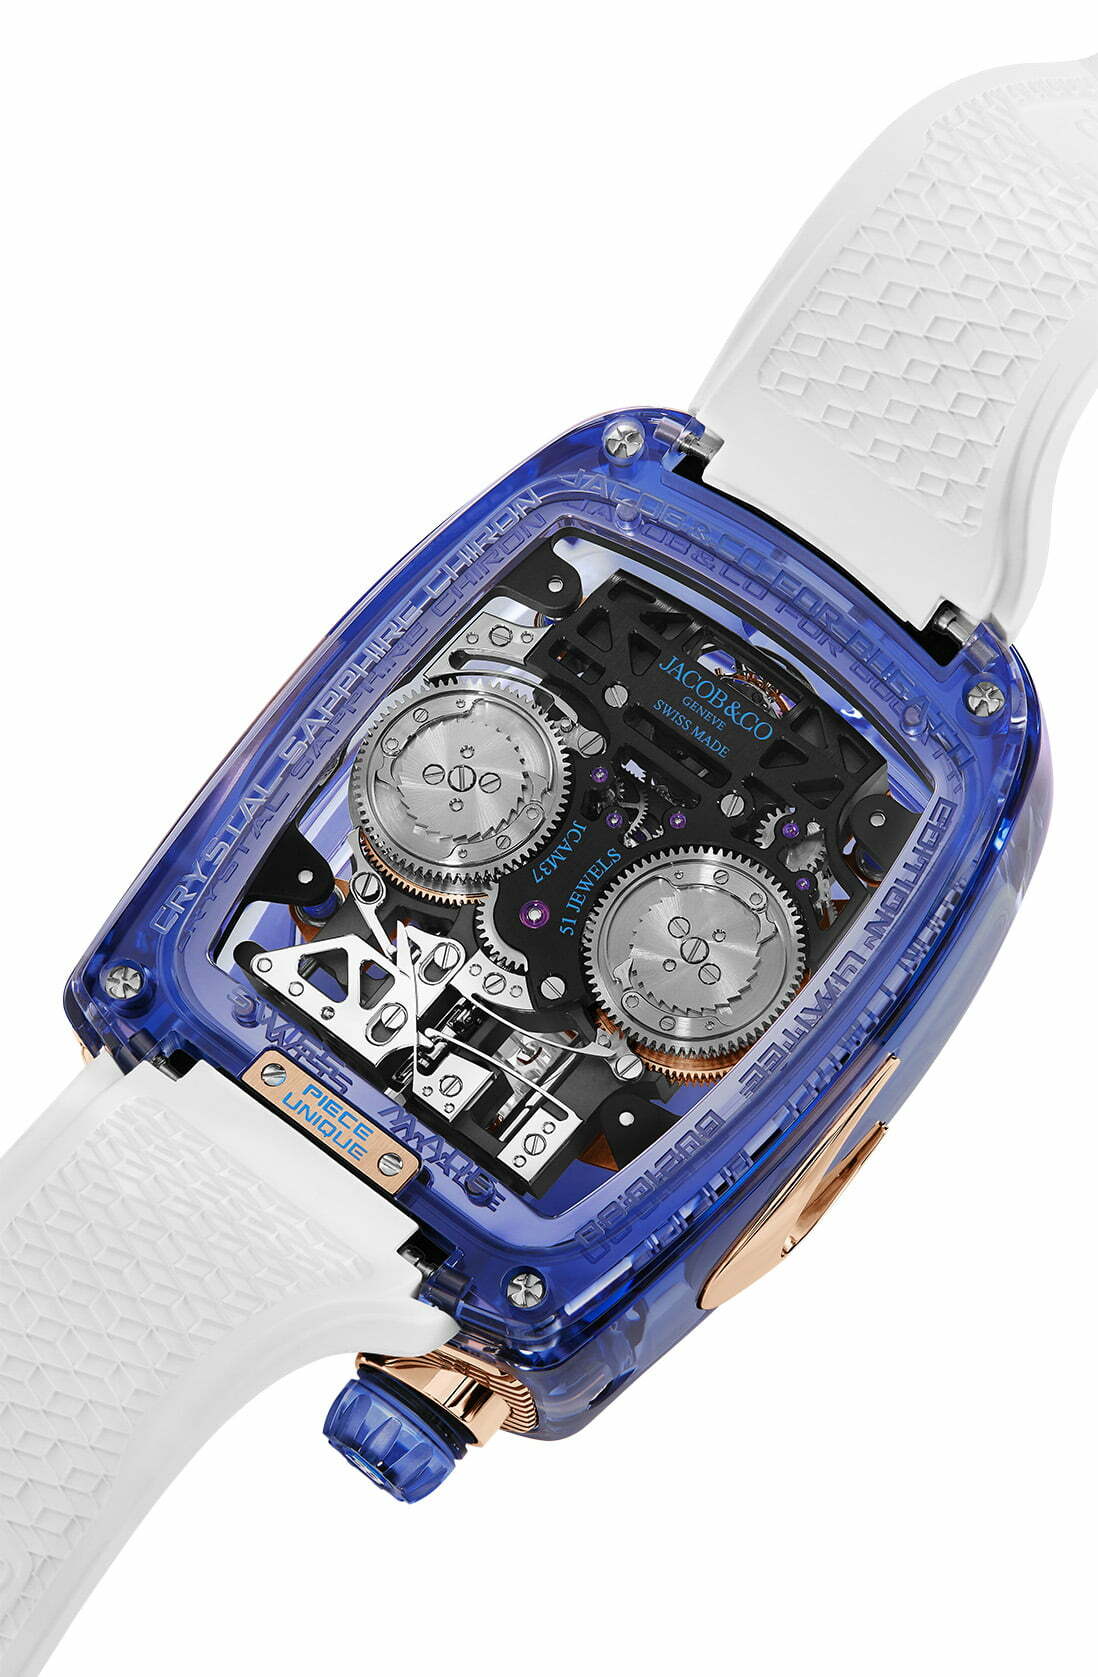 Bugatti Chiron Blue Sapphire Crystal Timepiece from Jacob & Co.